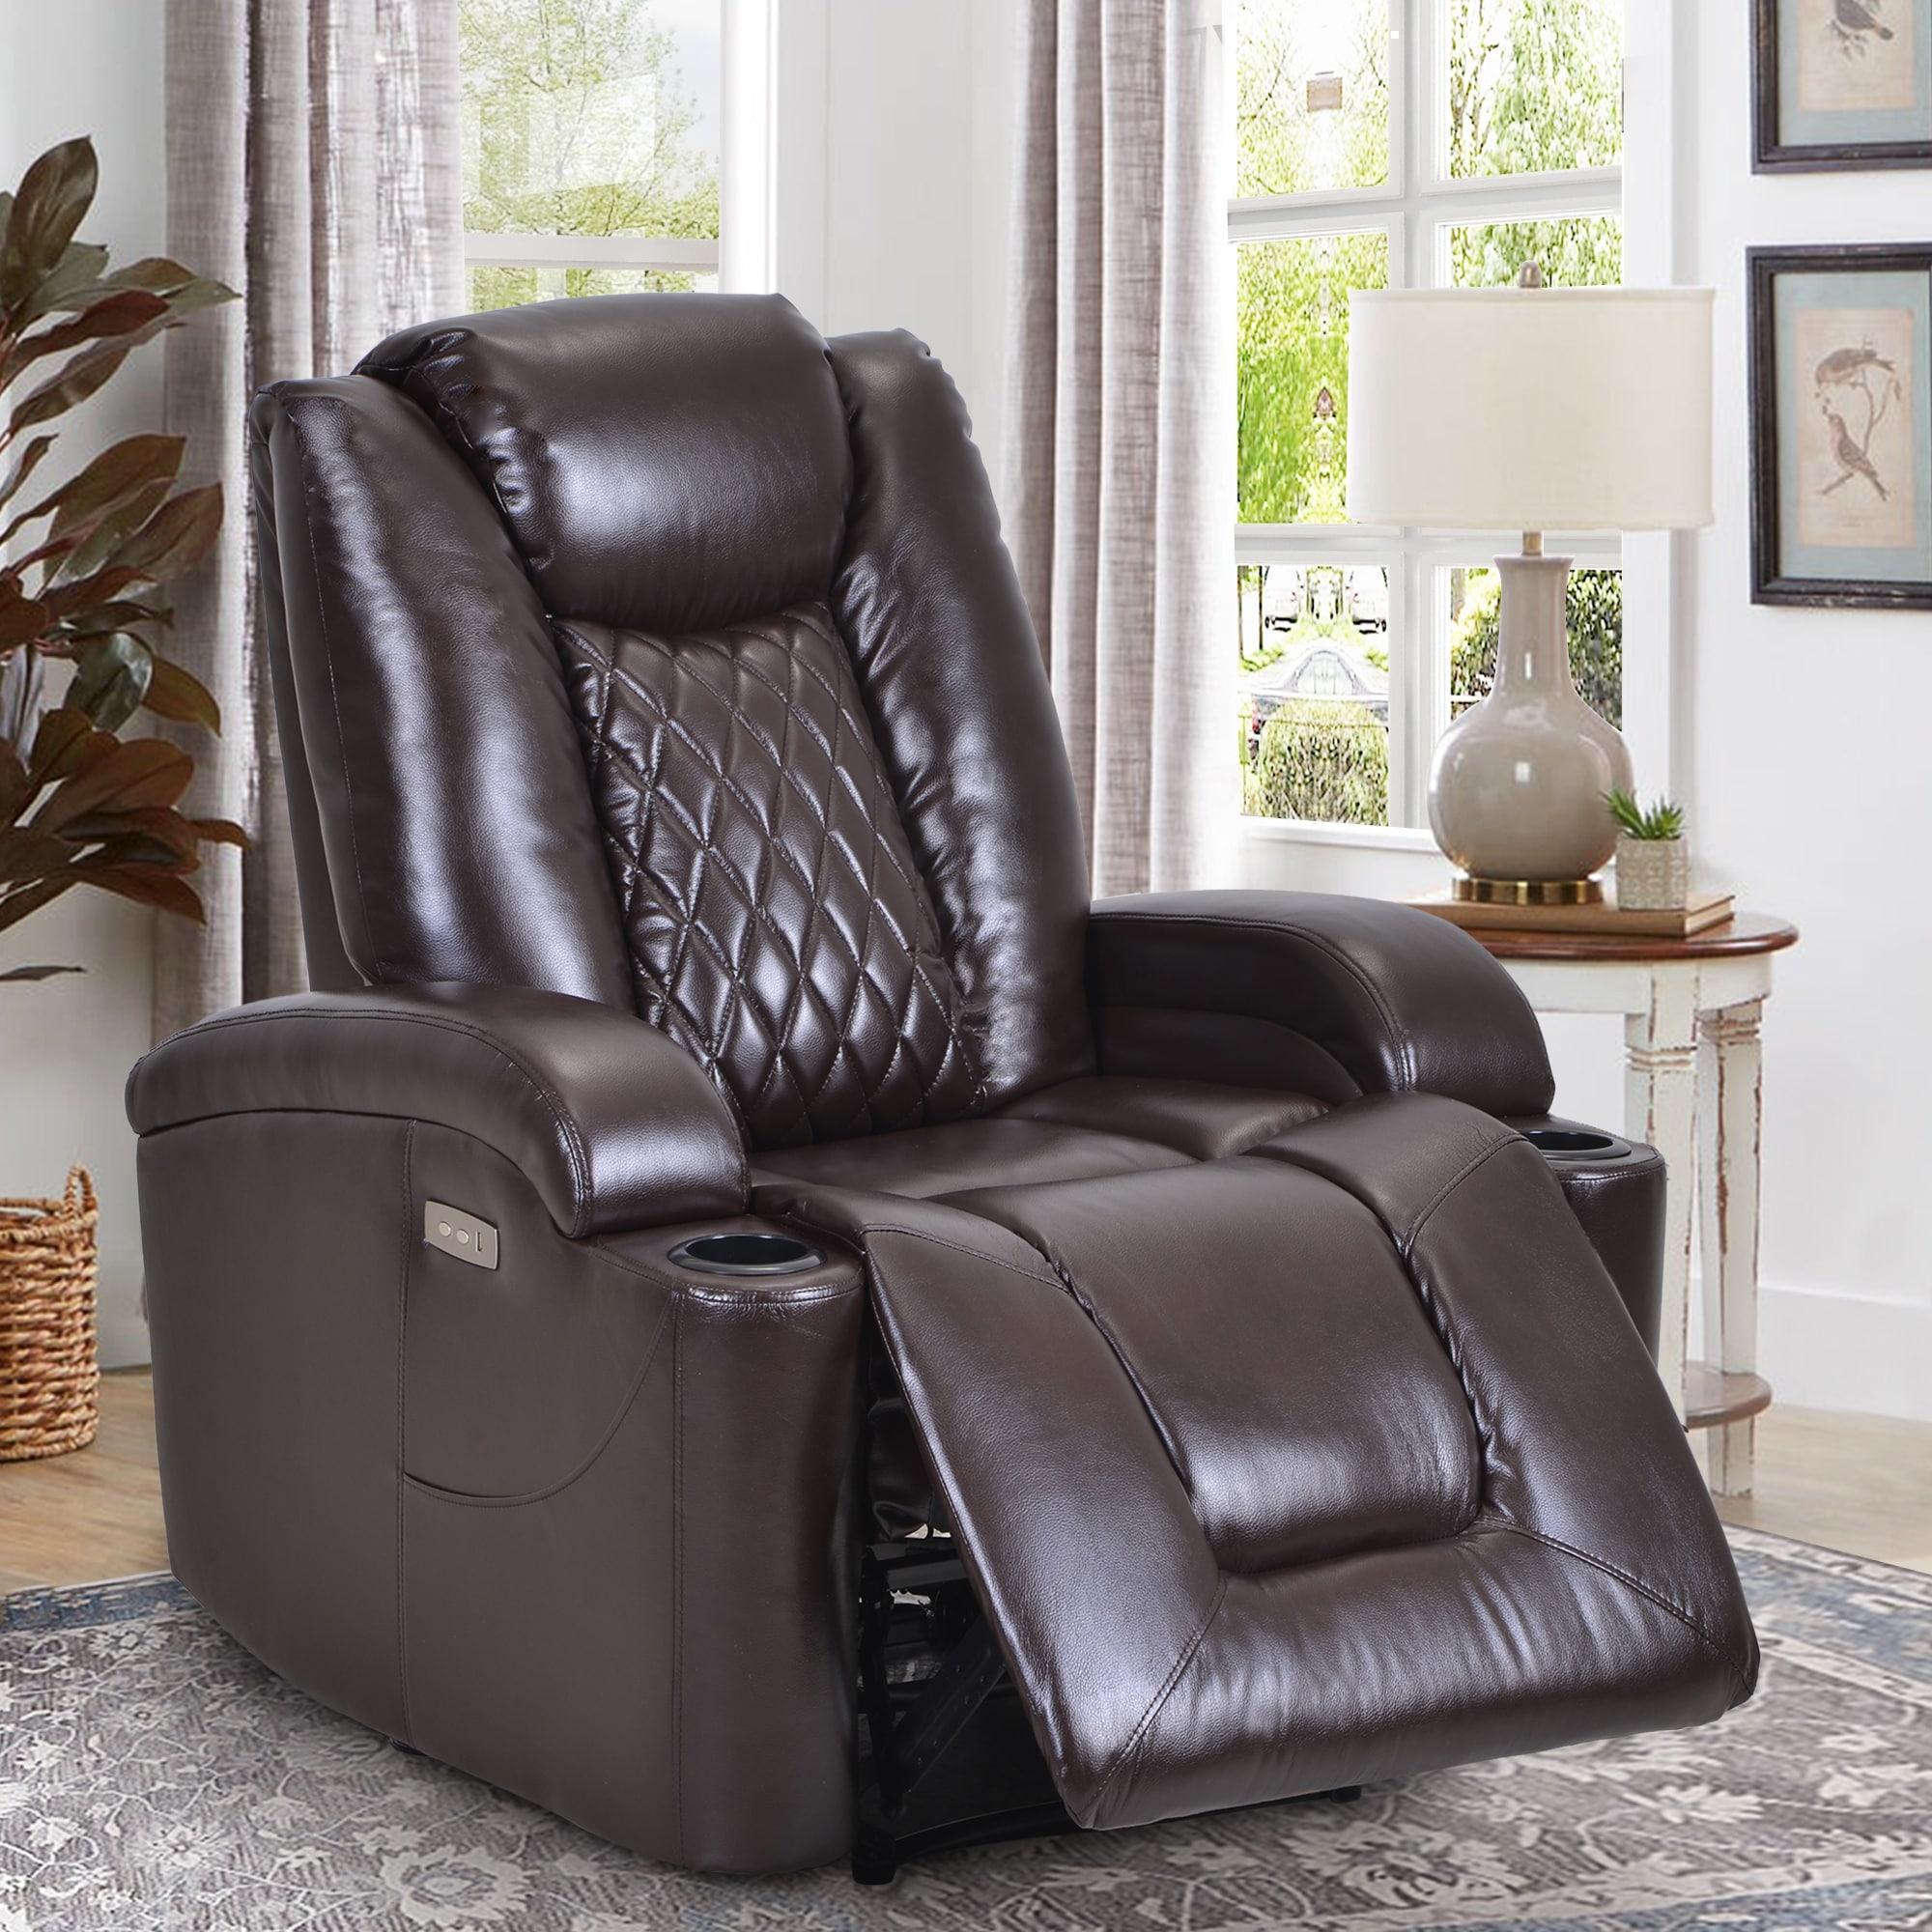 Nestfair PU Power Motion Recliner with USB Charge Port and Cup Holder Deals